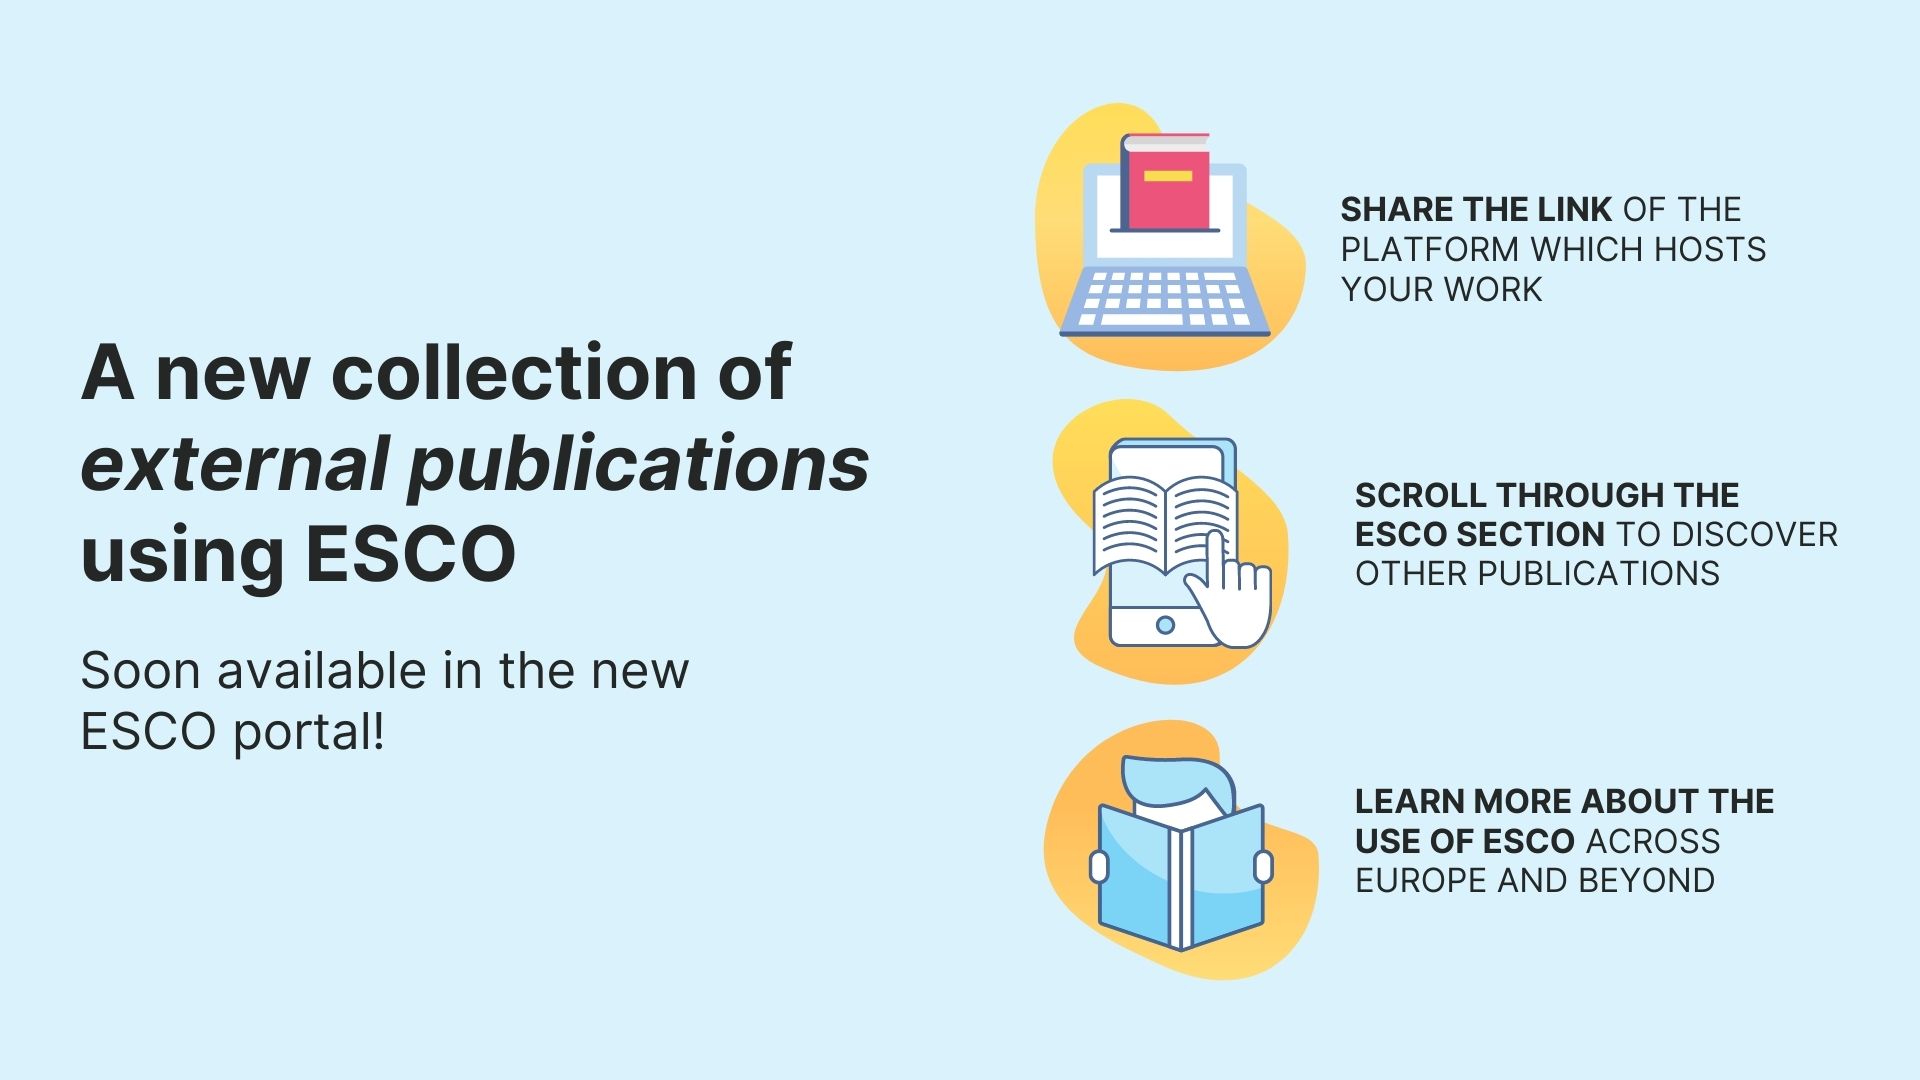 Image stating: A new collection of external publications using ESCO soon available in the new ESCO portal